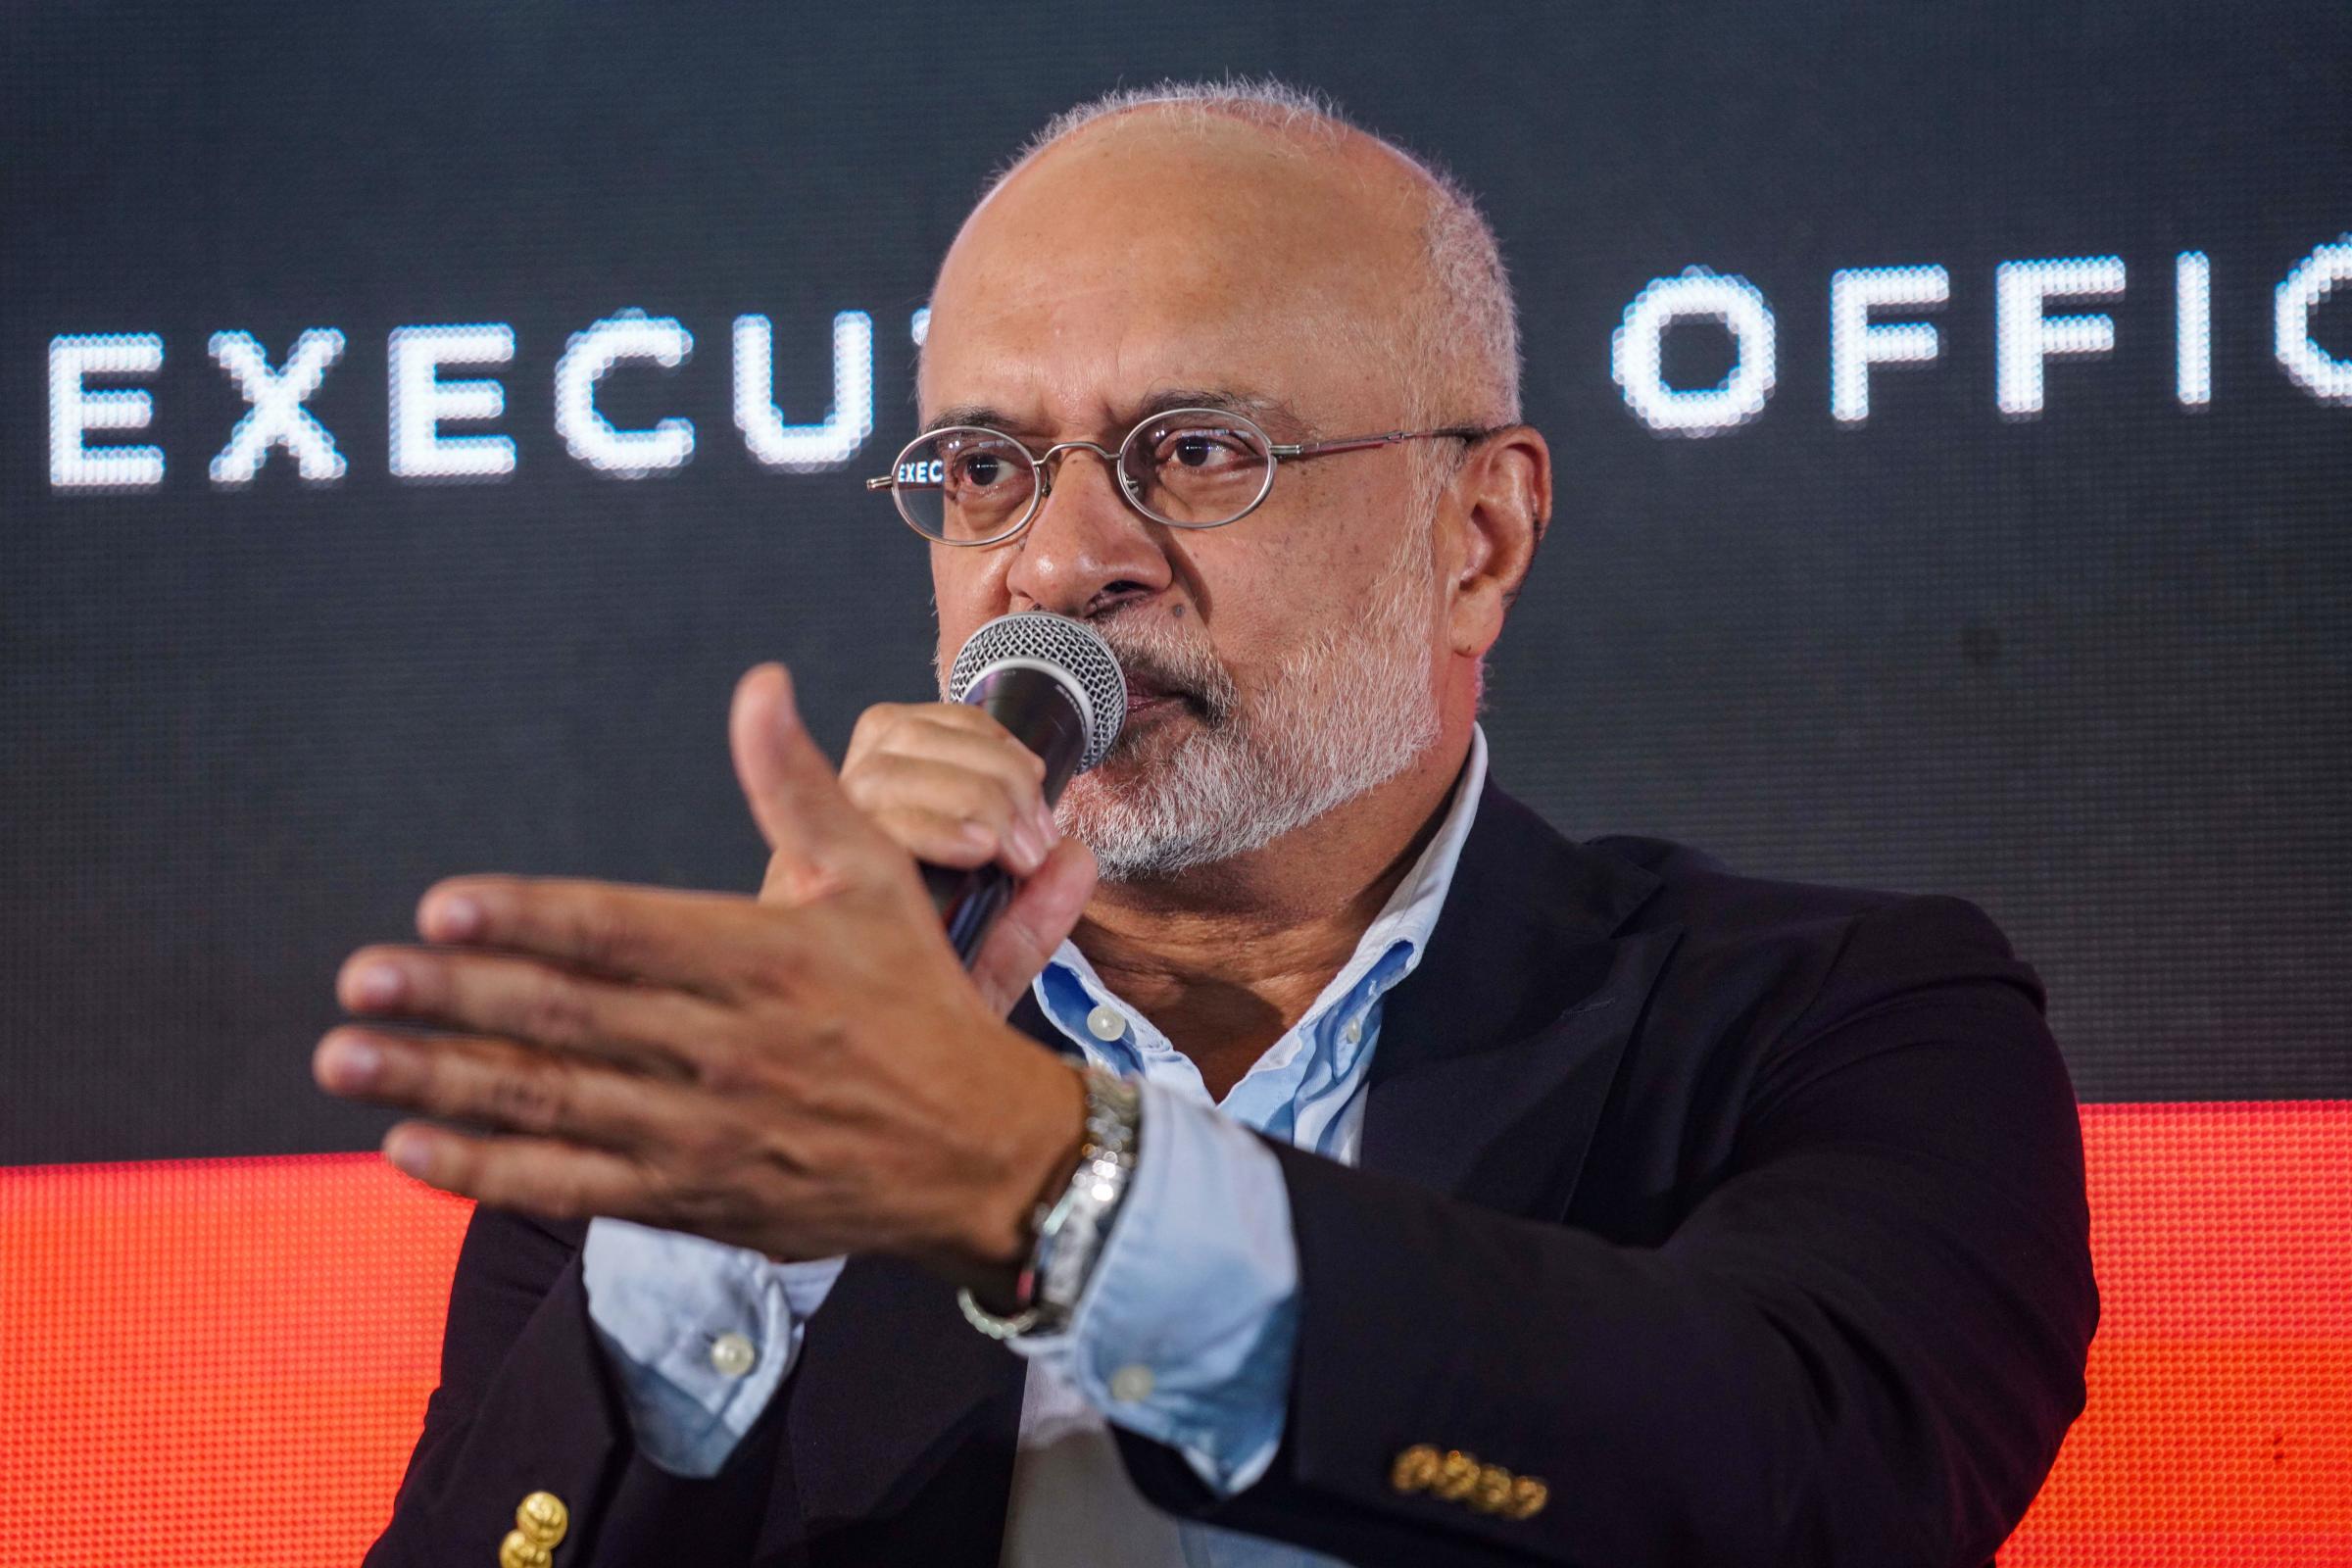 Piyush Gupta, CEO of DBS Bank attends the TIME100 Leadership Forum on Oct. 02, 2022 in Singapore.